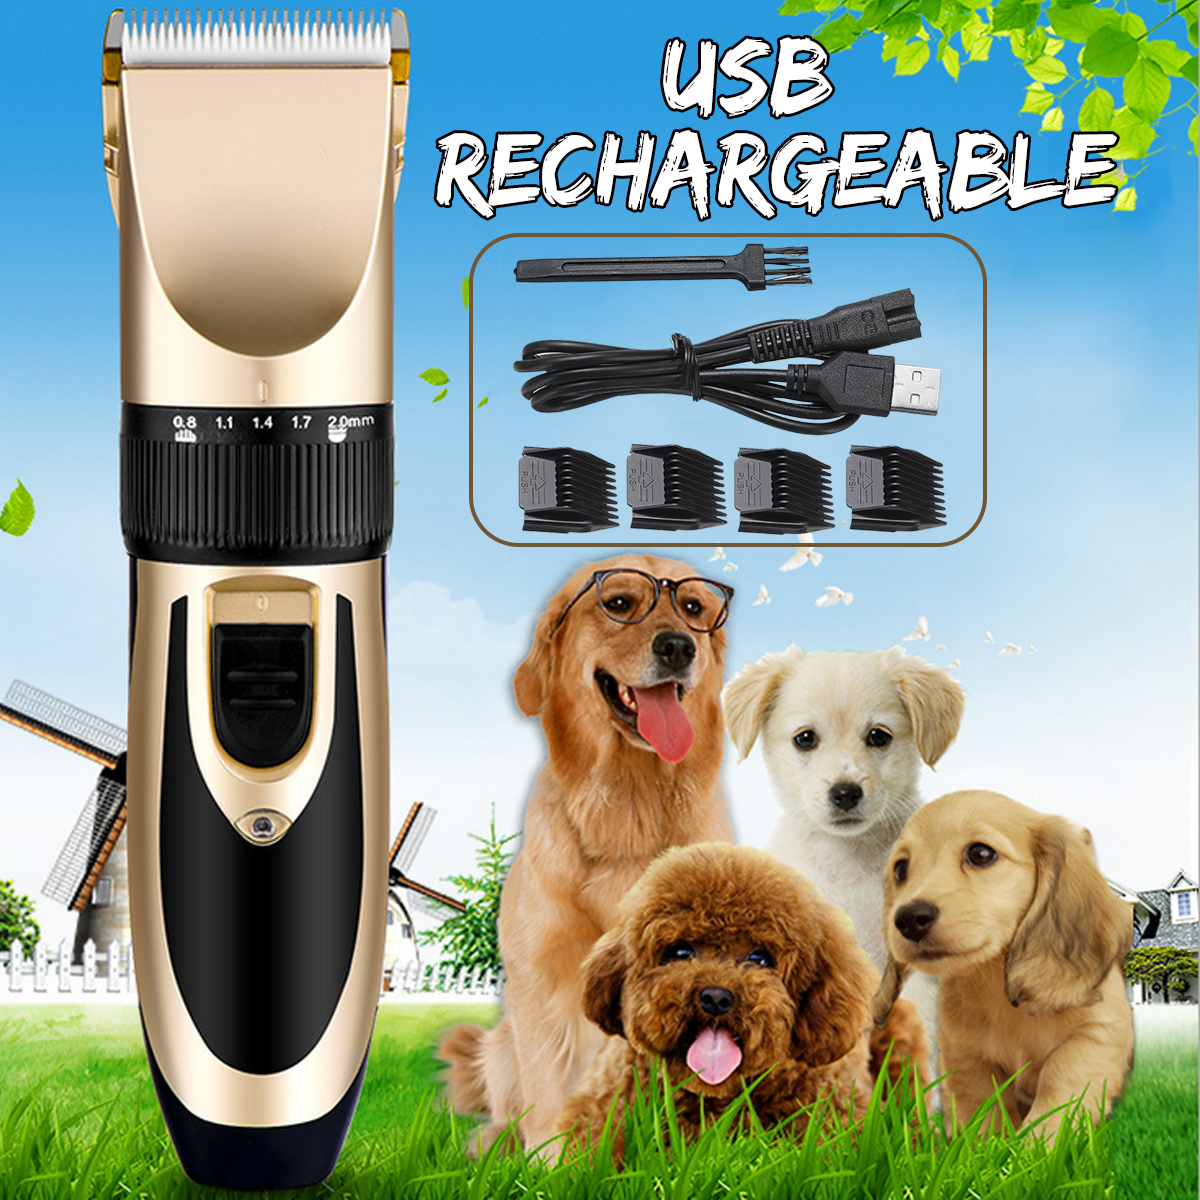 USB-Rechargeable-Pet-Hair-Clipper-Cat-Dog-Trimmer-Kit-Pet-Grooming-Scissor-Portable-Puppy-Accessorie-1423805-1